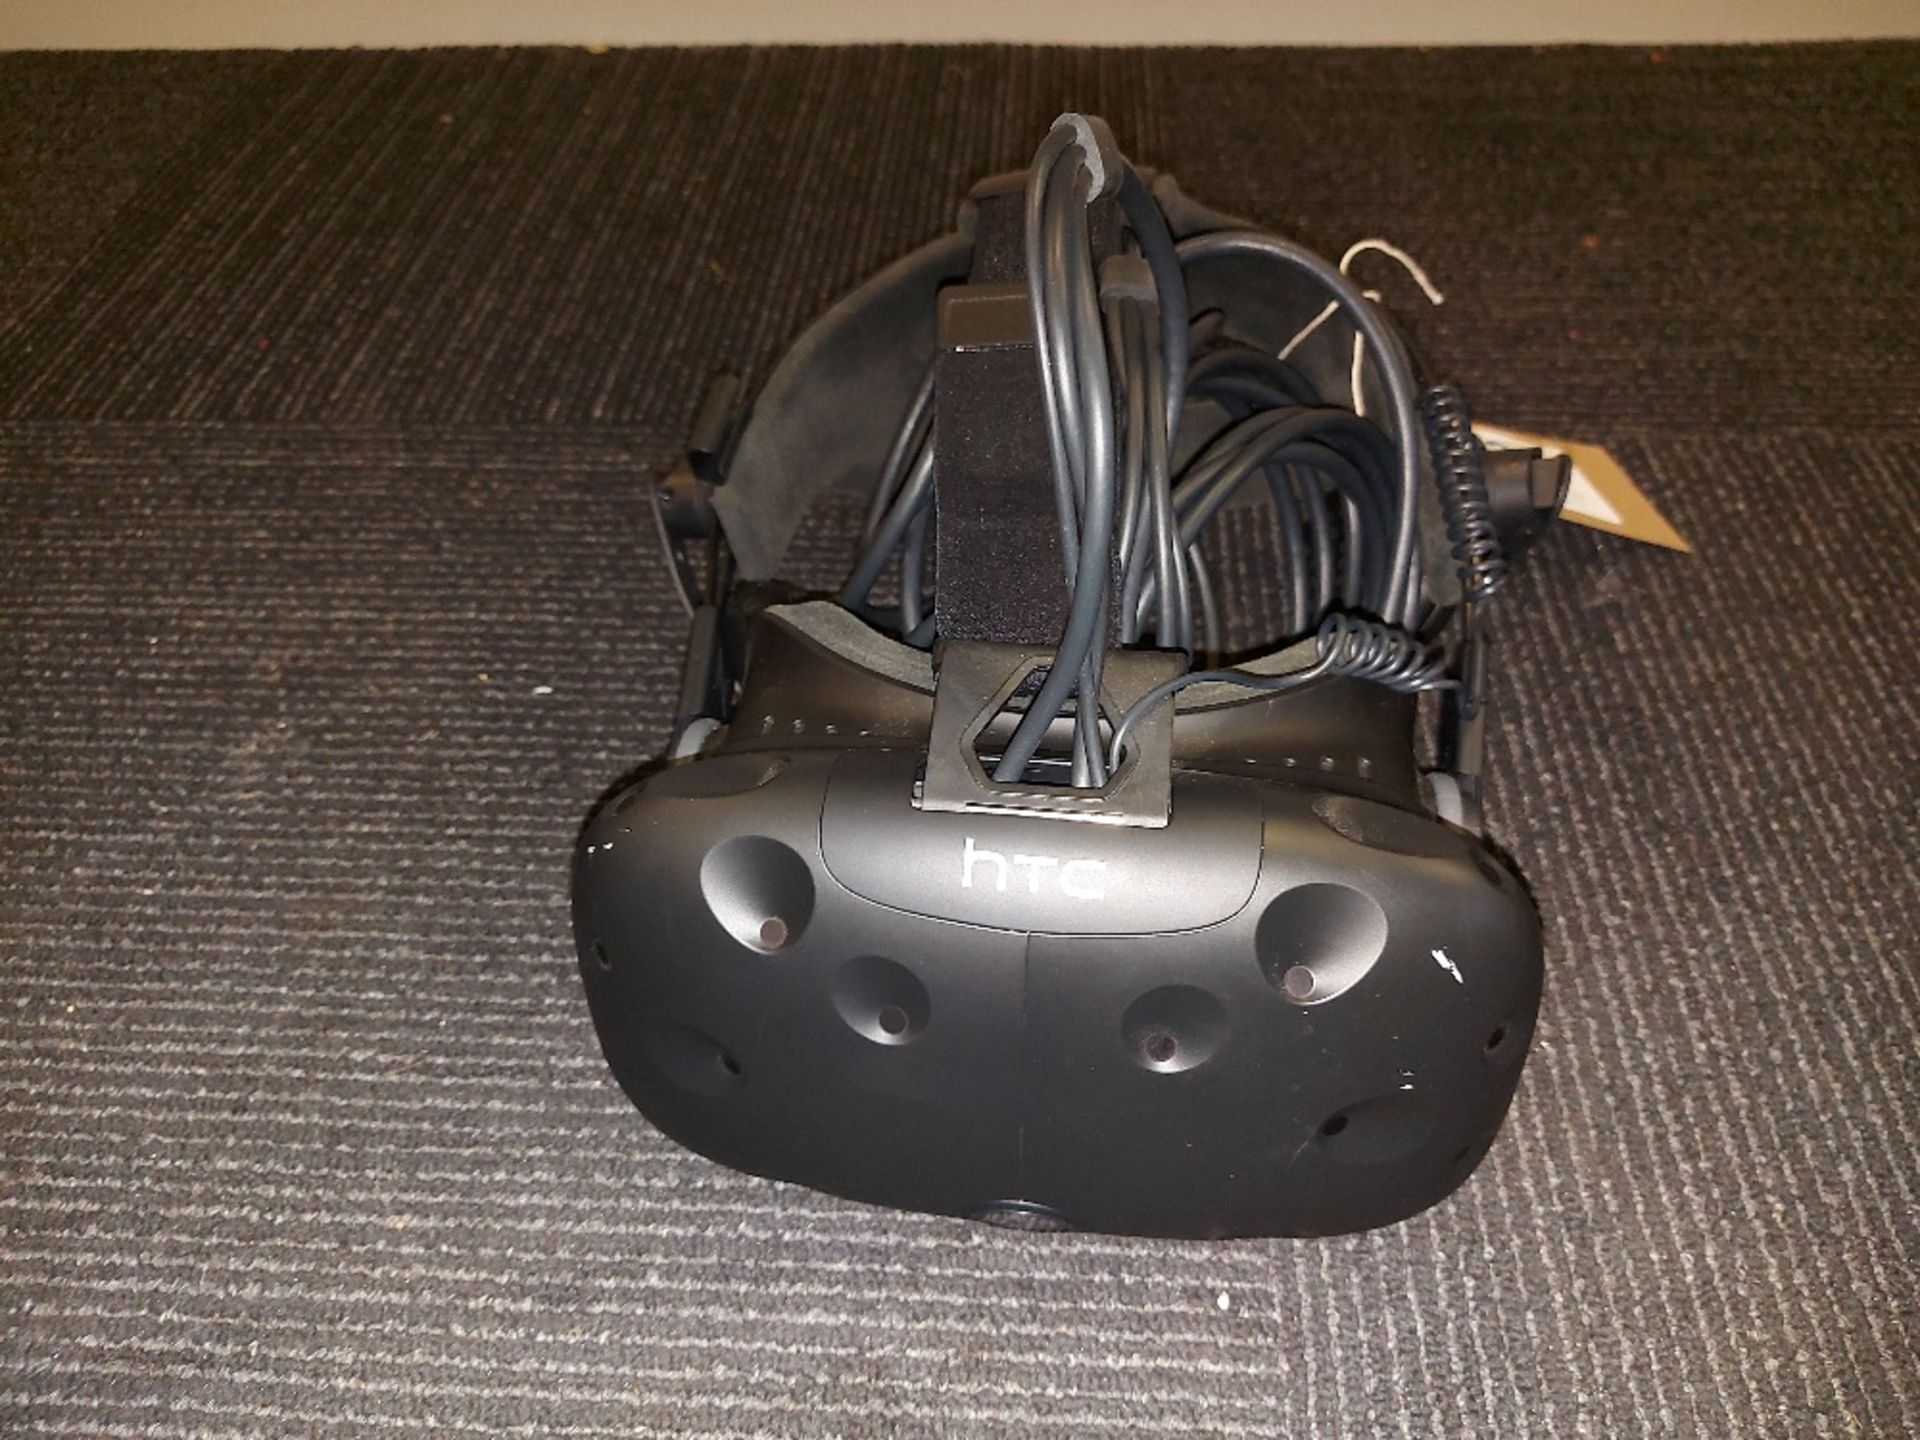 HTC Vive Virtual Reality Headset with (2) Handheld Controllers - Image 2 of 5